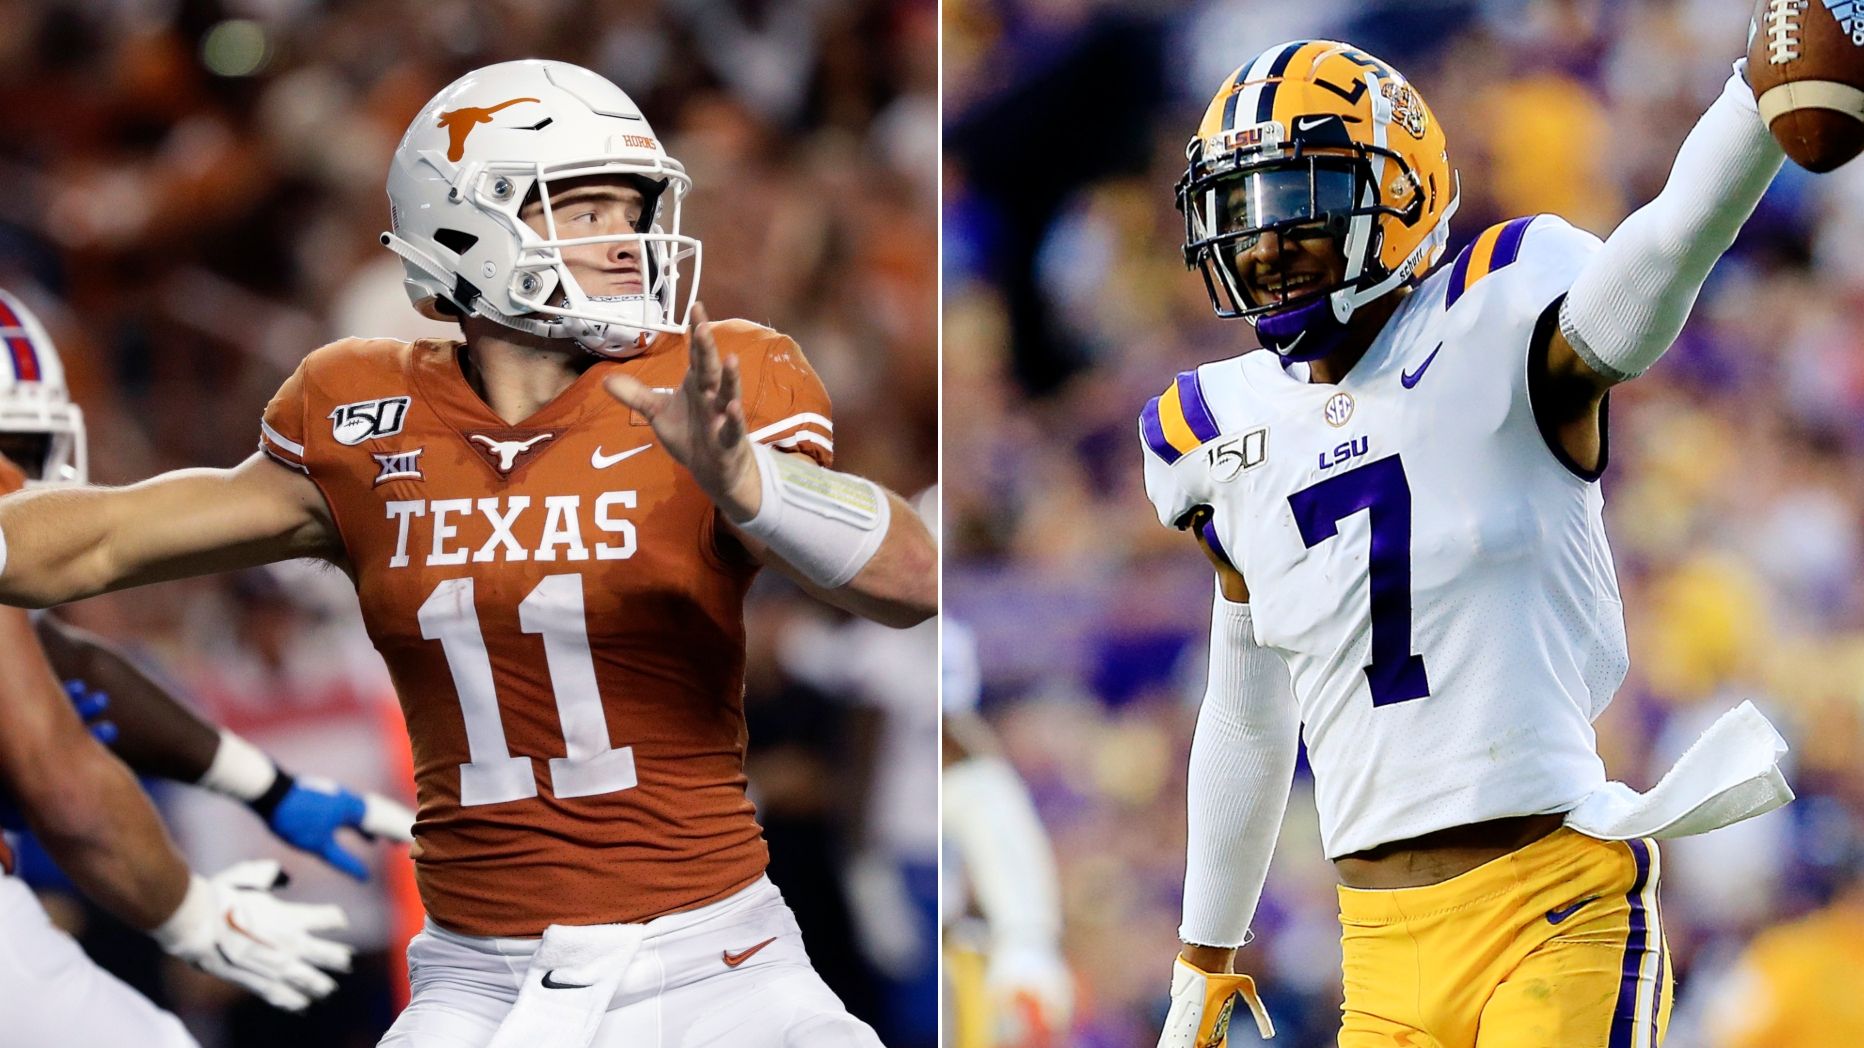 Texas vs. LSU features two of the country's best impact players ESPN